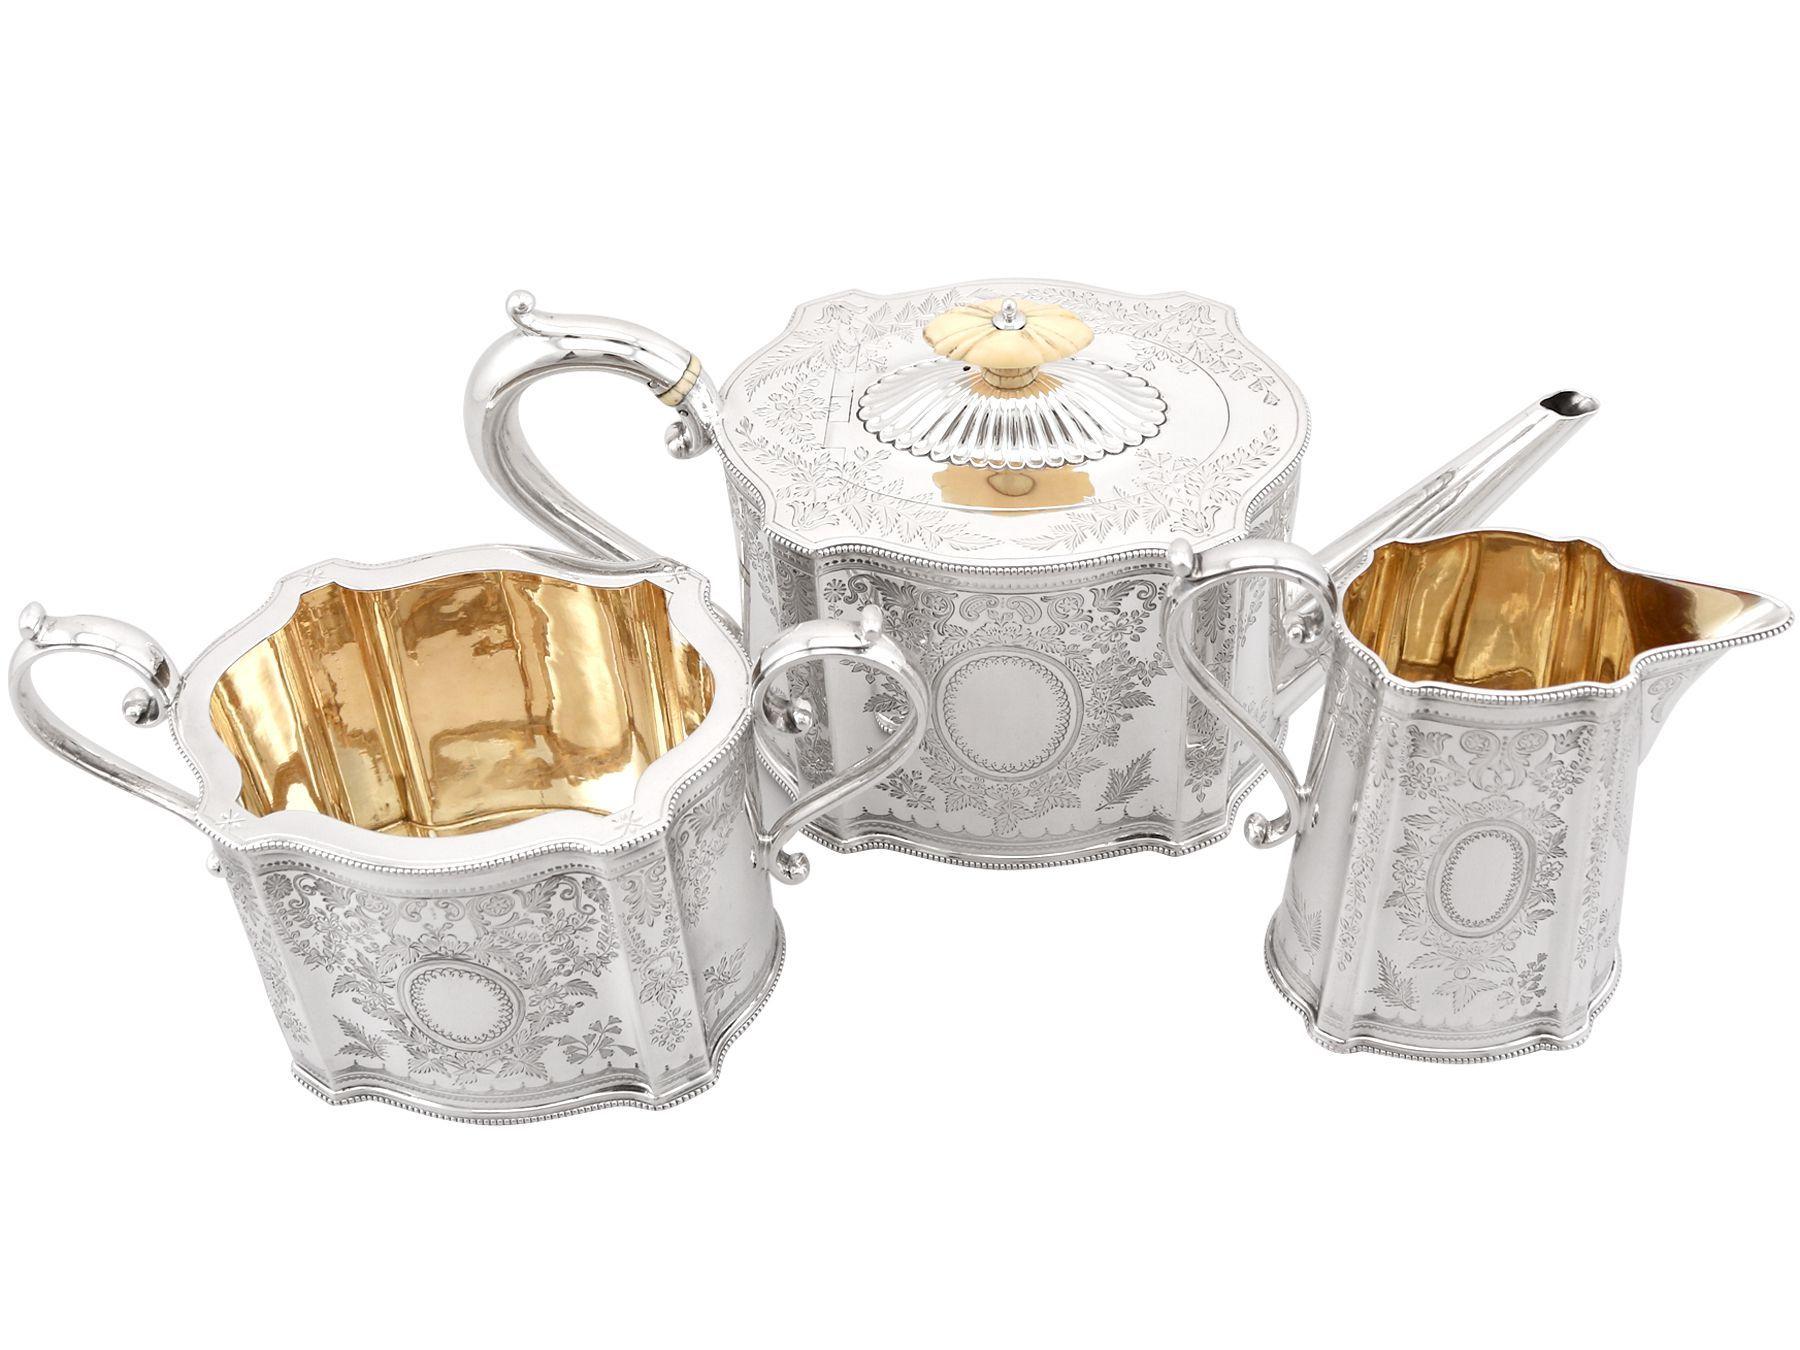 An exceptional, fine and impressive antique Victorian English sterling silver three piece tea service; an addition to our silver teaware collection.

This exceptional antique Victorian three piece silver tea set consists of a teapot, sugar bowl and